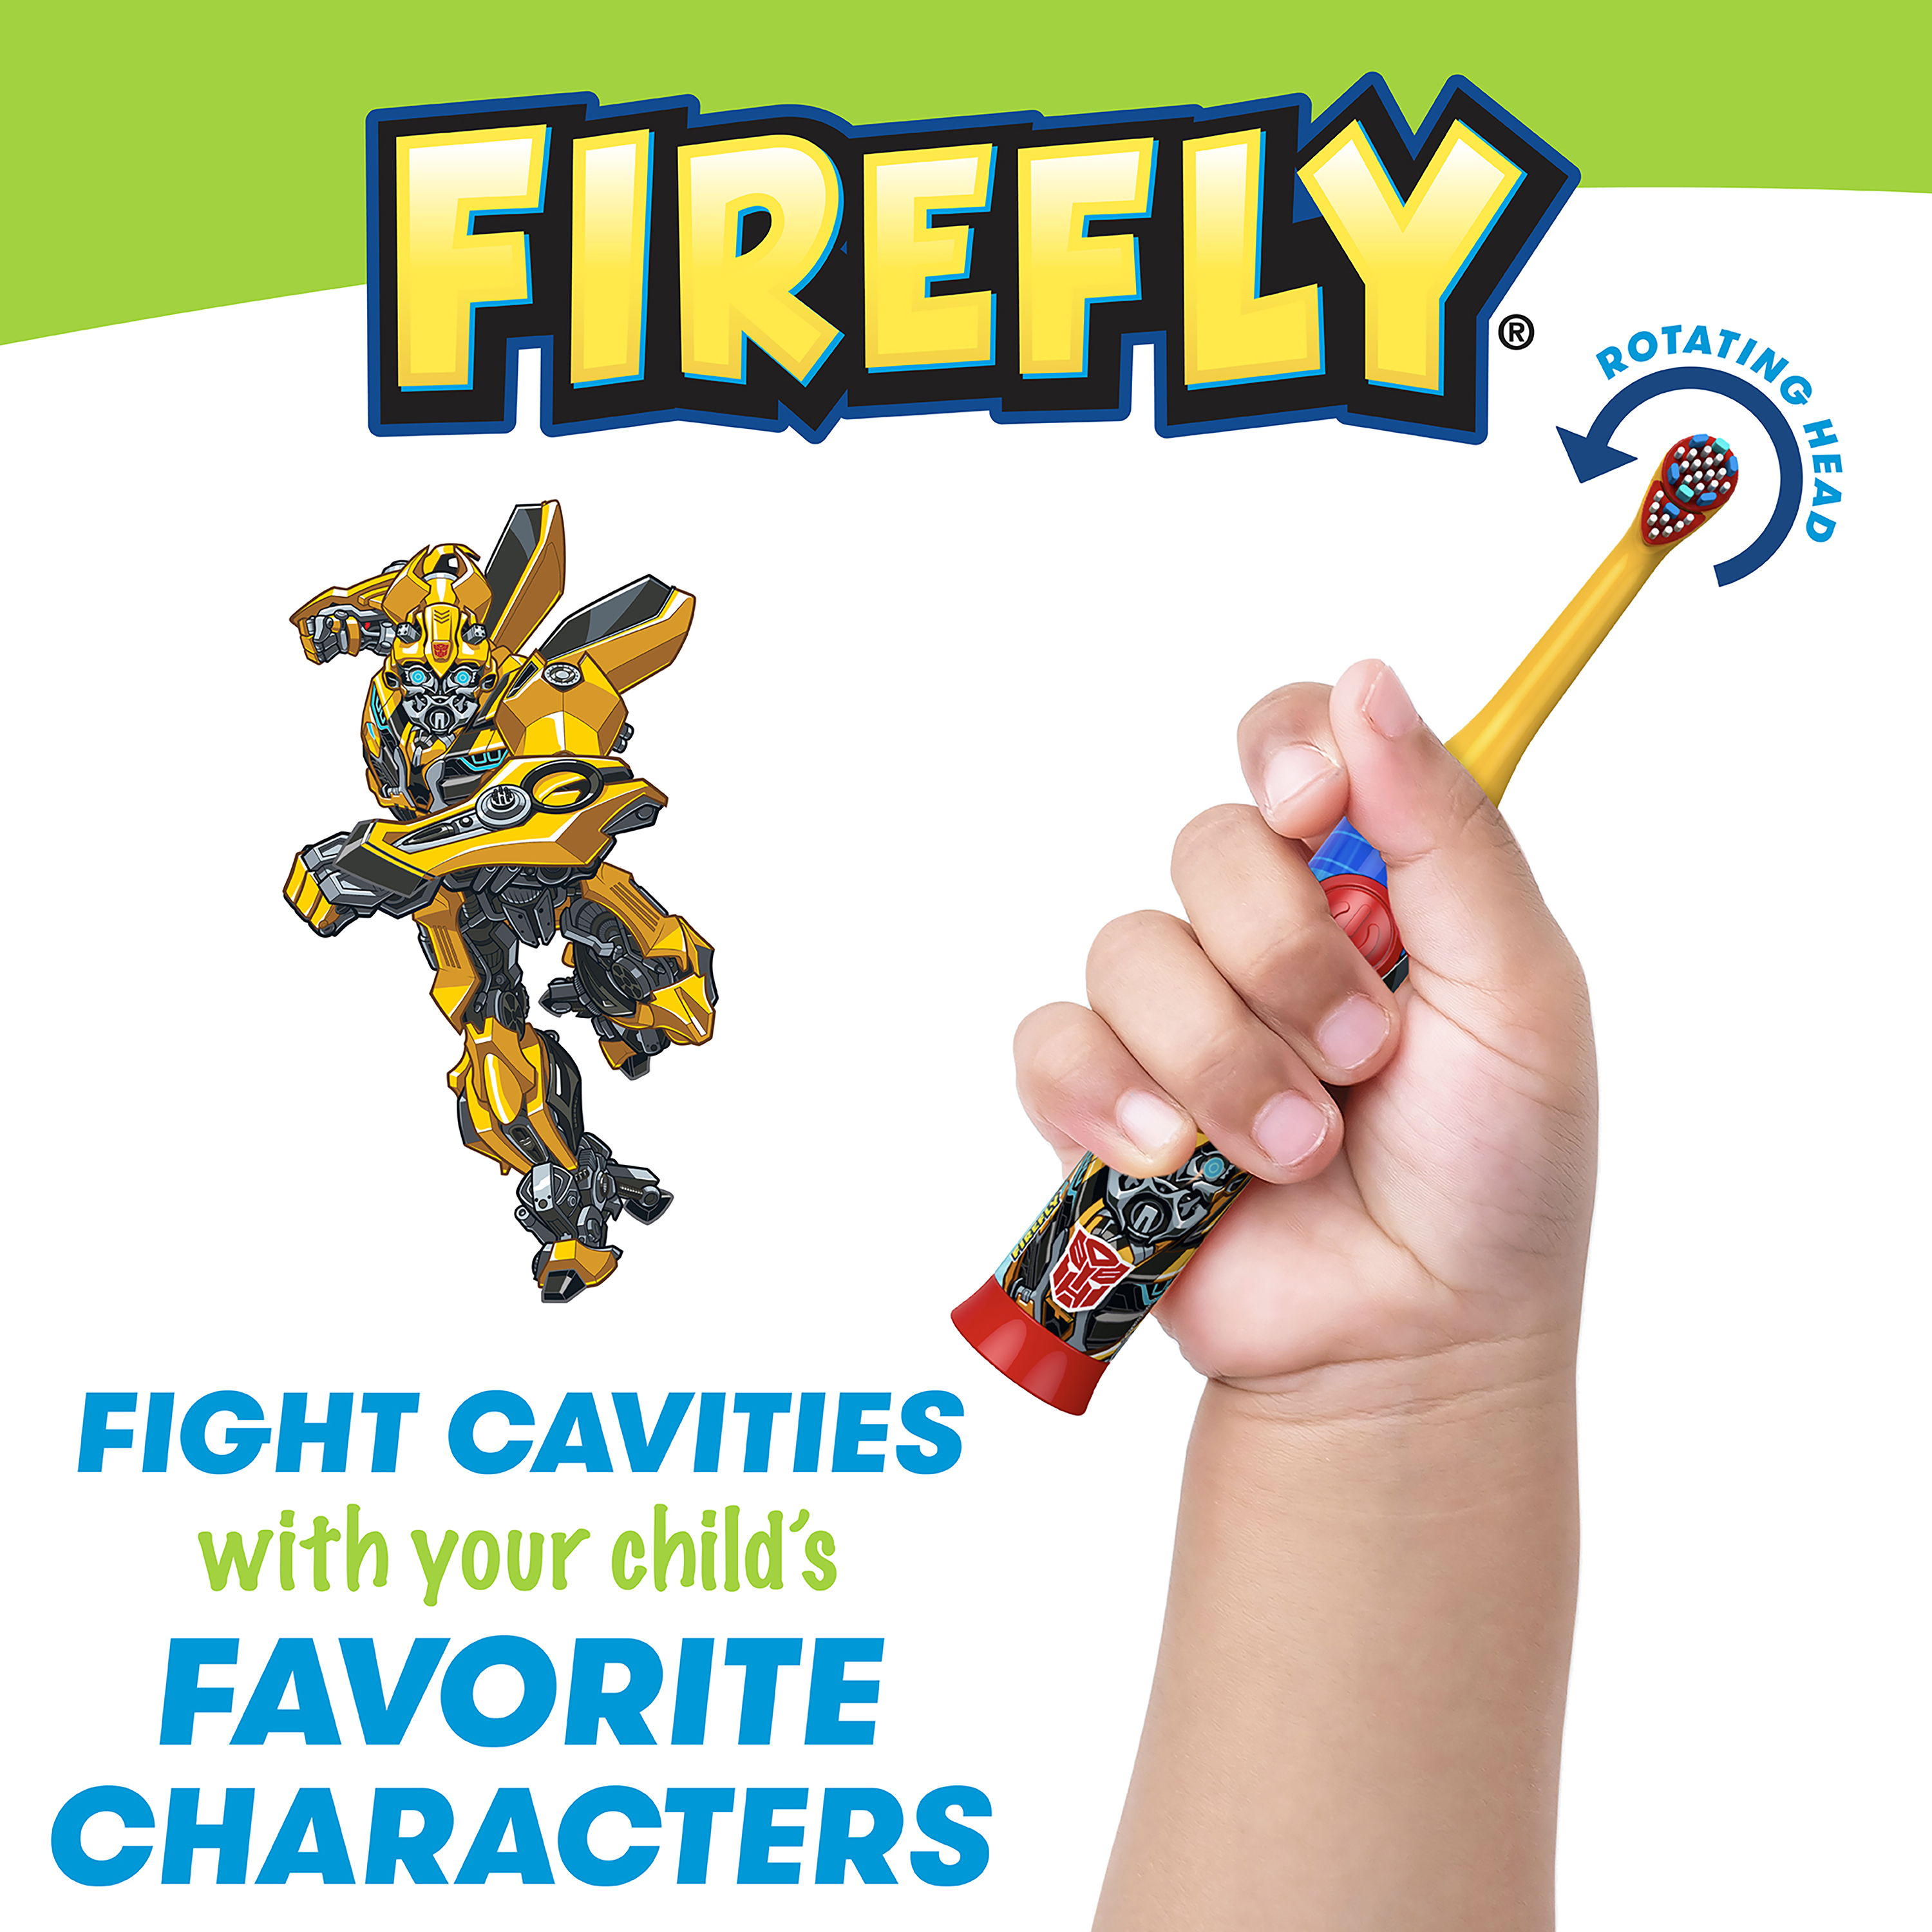 Firefly Clean N' Protect, Transformers Toothbrush with Fun 3D Antibacterial Character Cover, Soft Compact Brush Head, Ergonomic Handles for Small Hands, Battery Included, Ages 3+, 1 Count - image 5 of 8